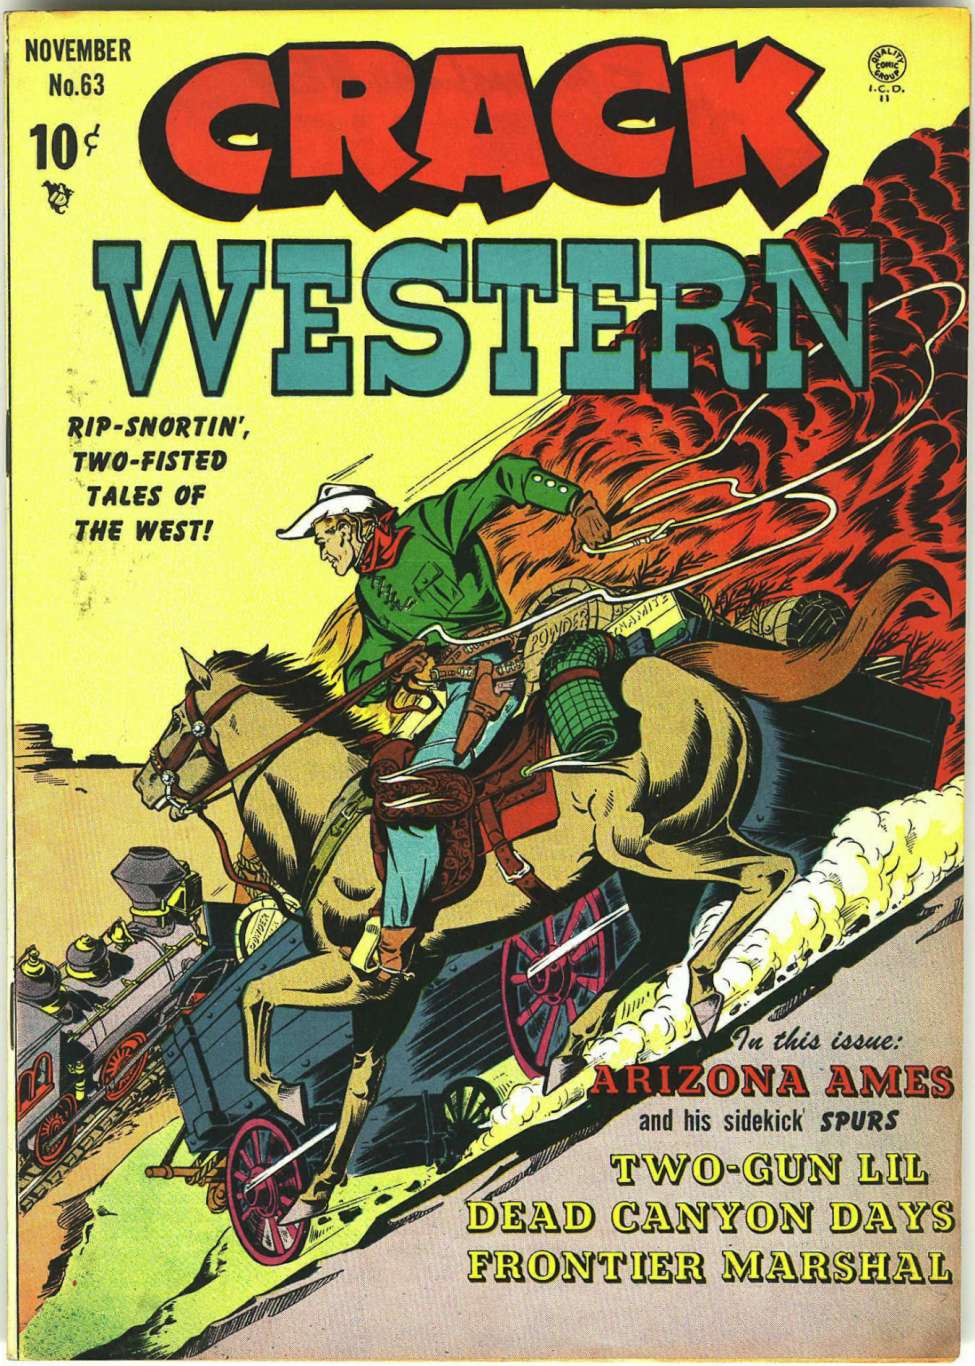 Book Cover For Crack Western 63 - Version 1